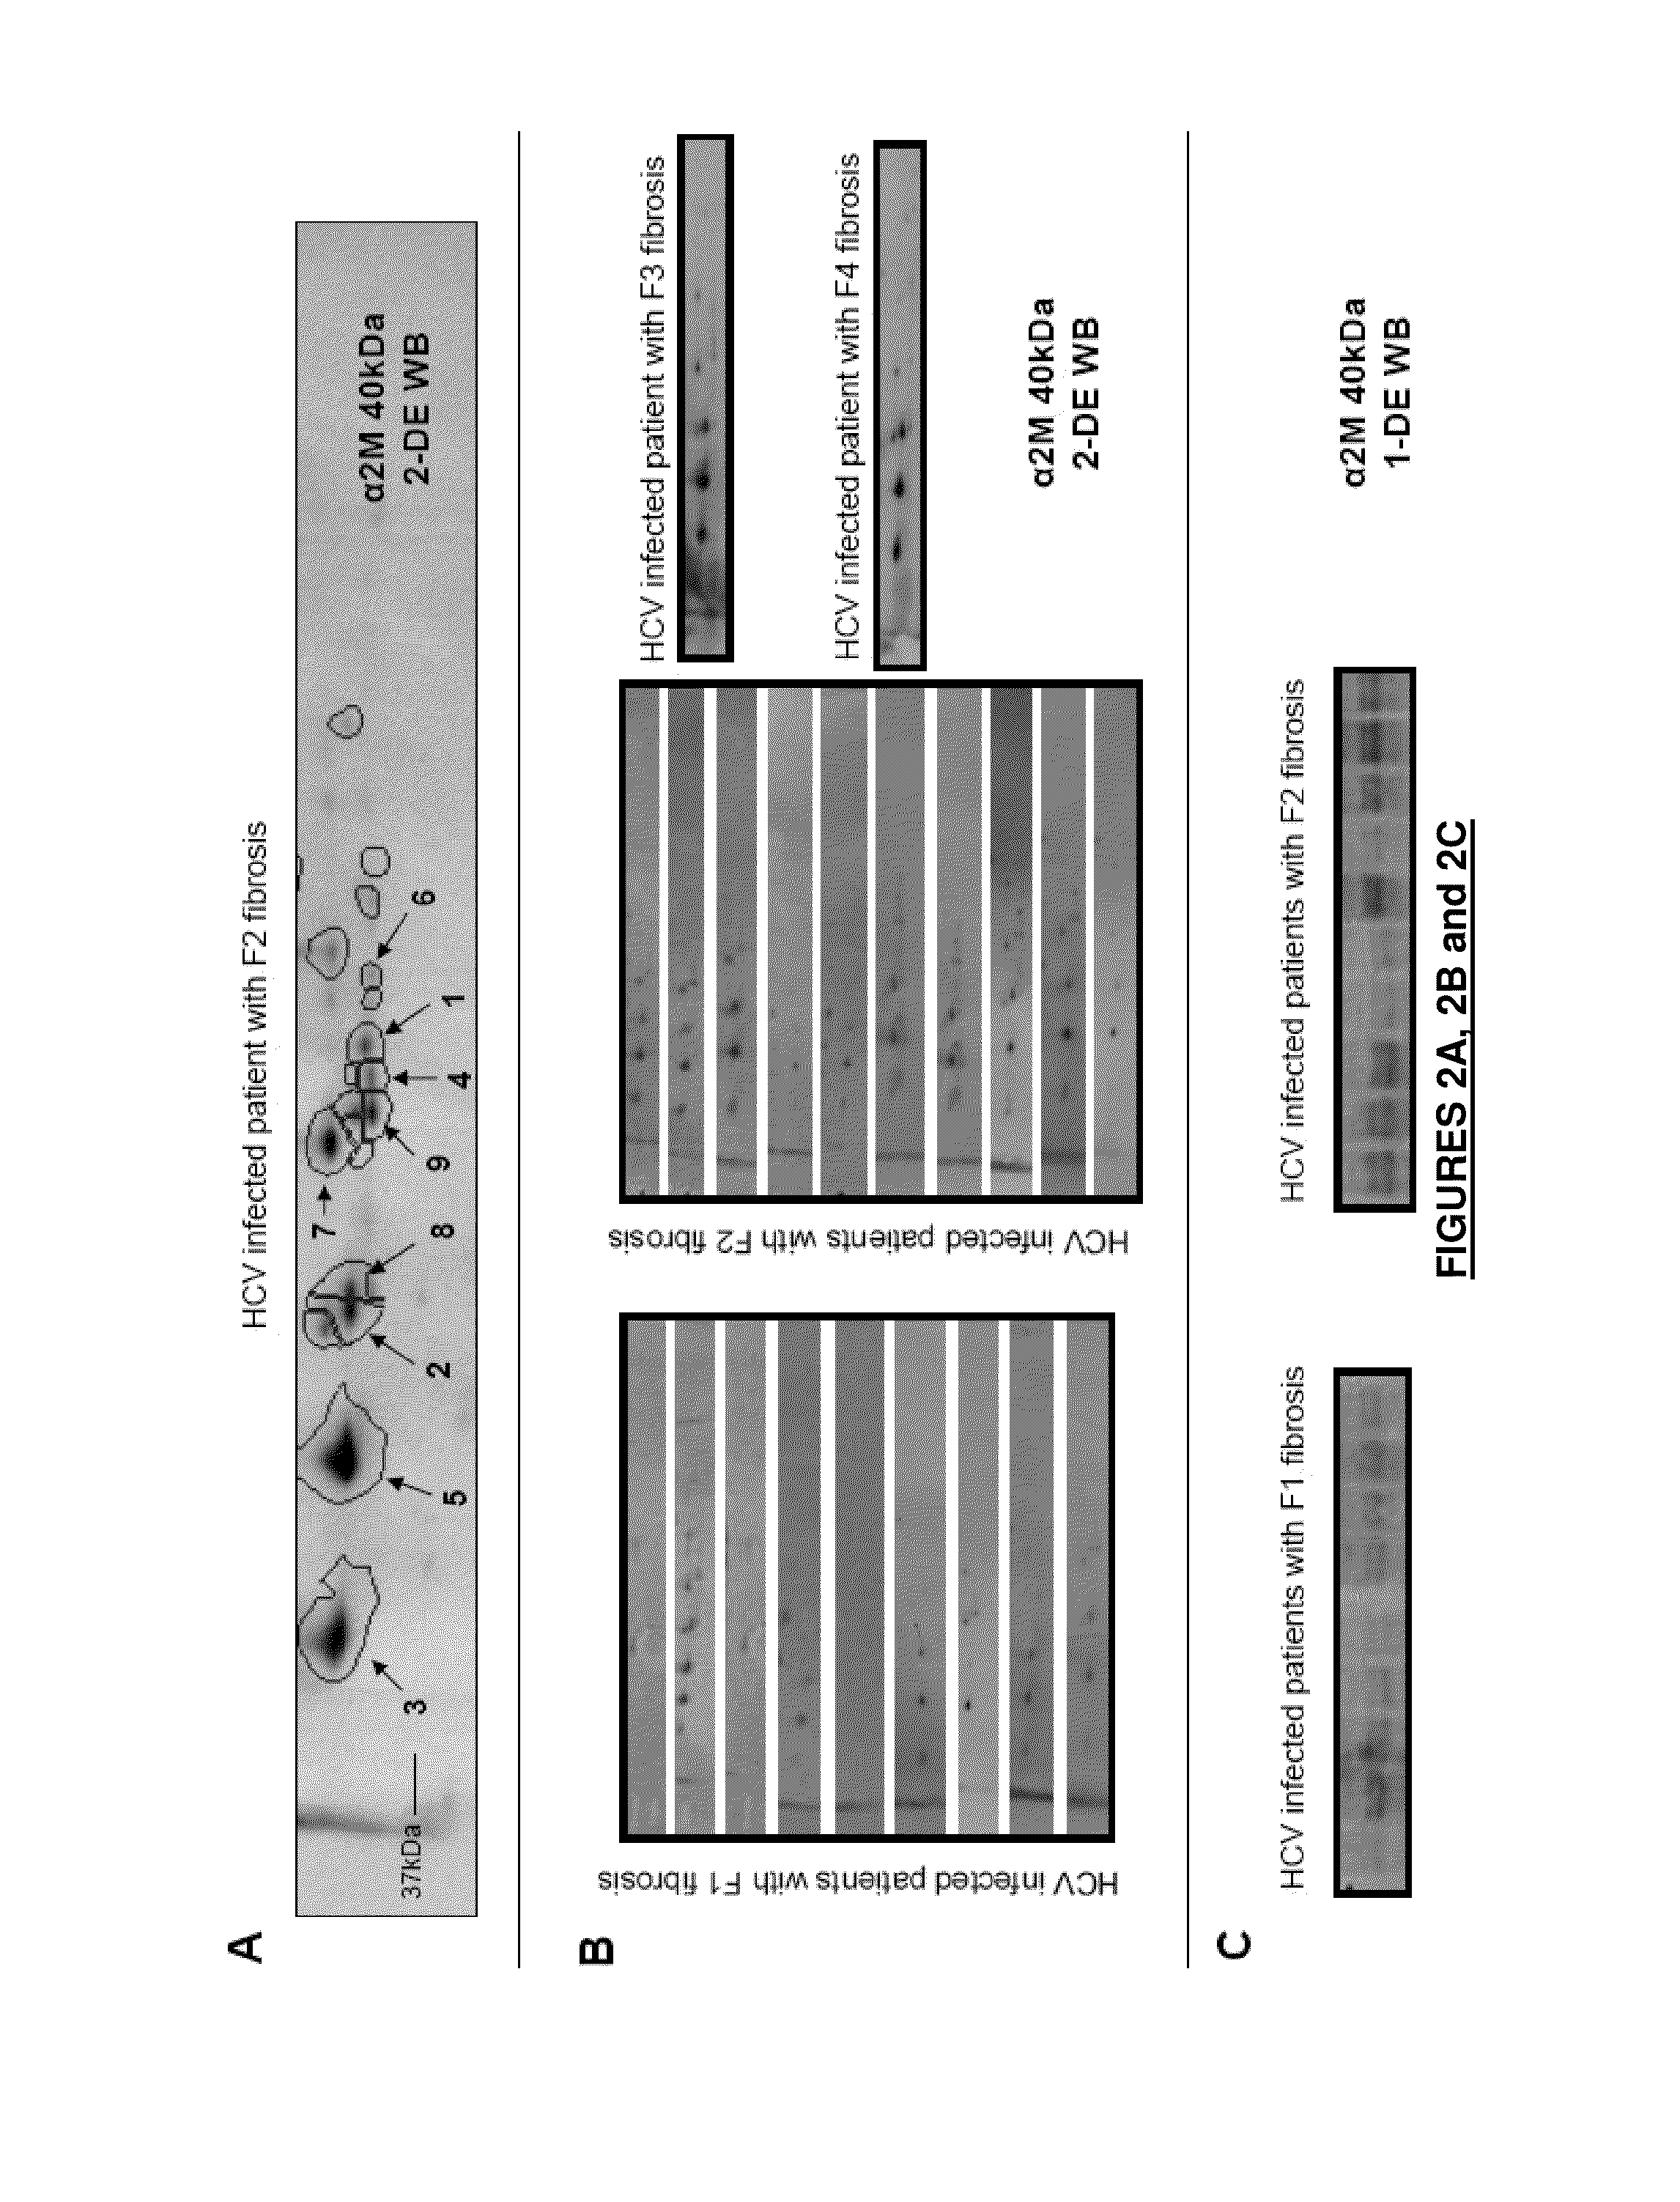 A2m fragments and applications thereof